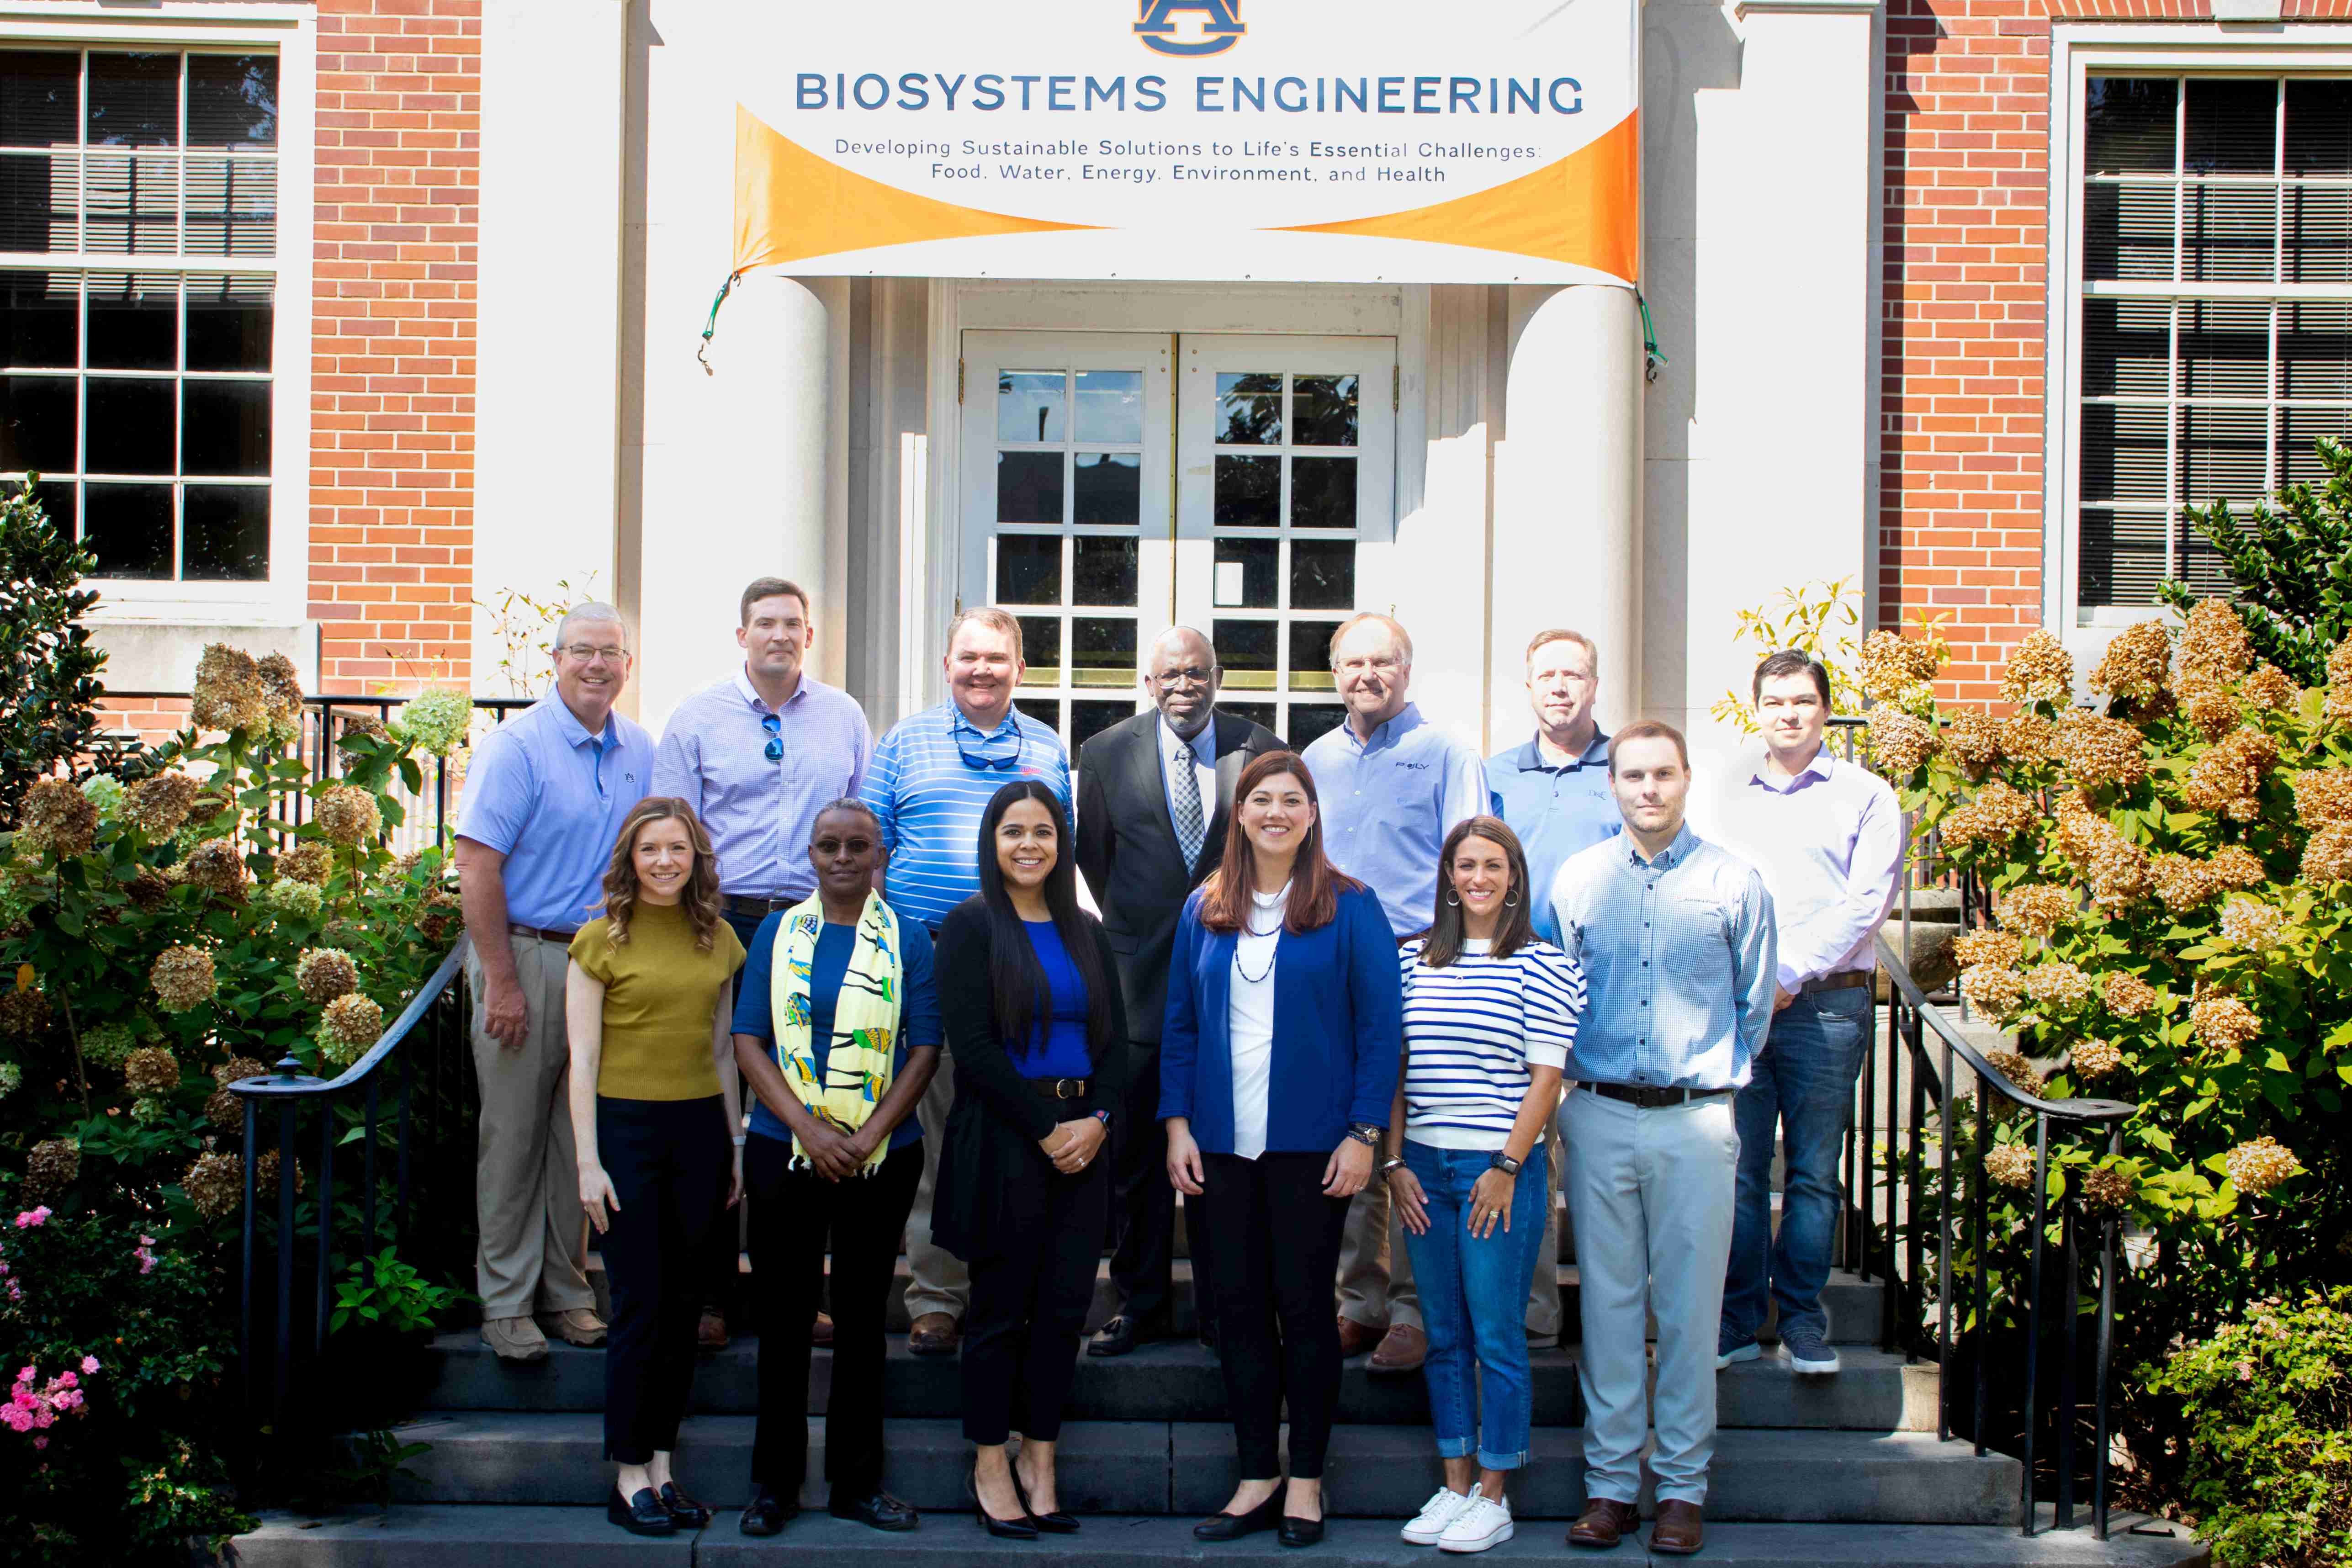 Group photo of the Biosystems Advisory Council